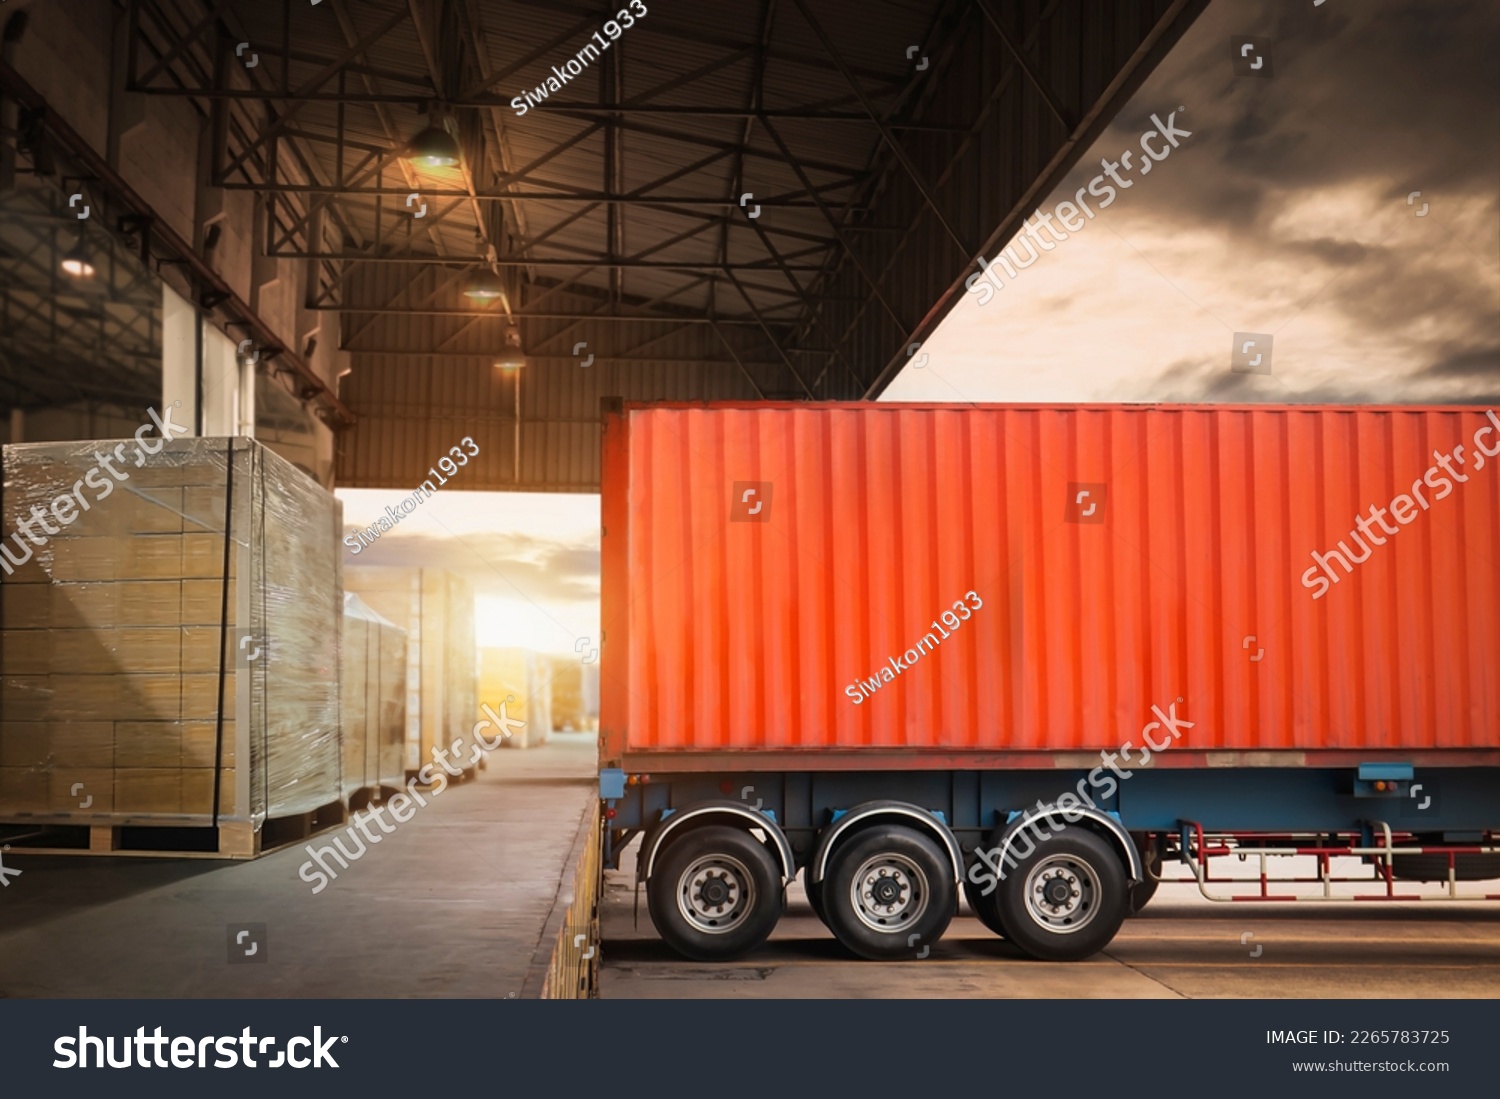 Container Trailer Trucks Parked Loading at Dock Warehouse. Delivery Truck. Package Boxes Shipment. Distribution Warehouse. Supply Chain. Freight Trucks Logistics Cargo Transport	
 #2265783725